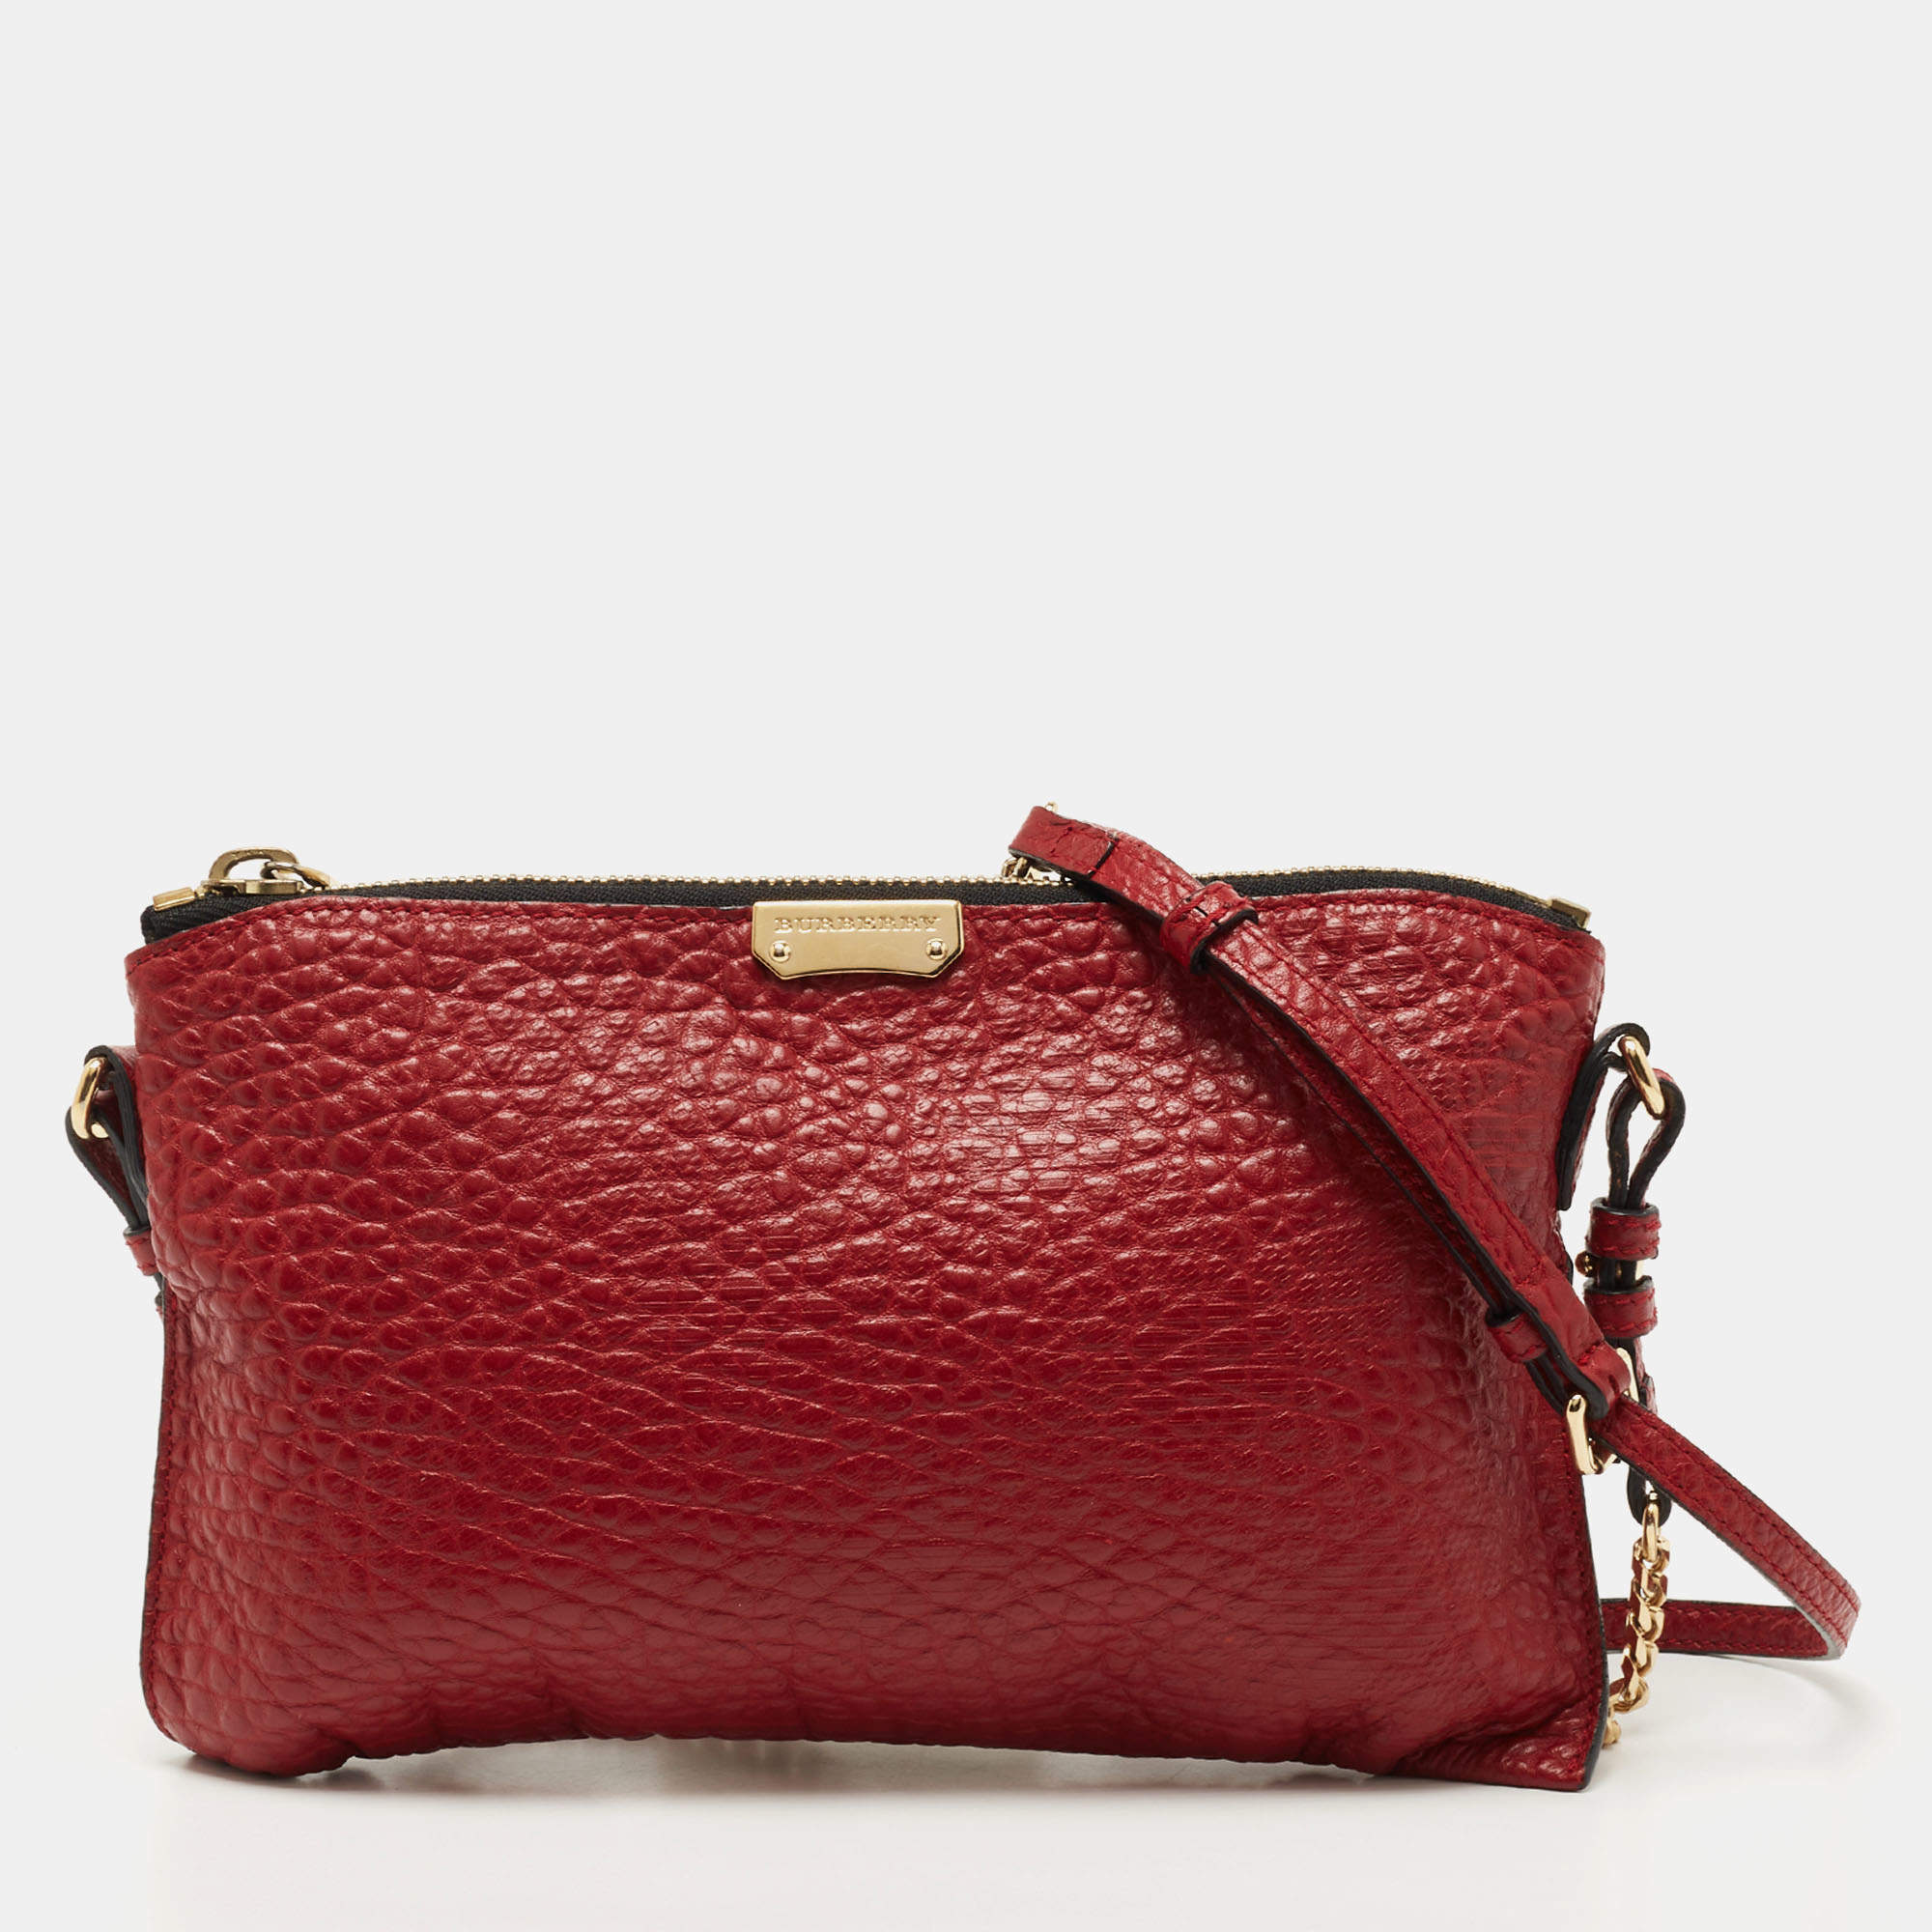 Burberry Red Grained Leather Chichester Crossbody Bag Burberry | TLC